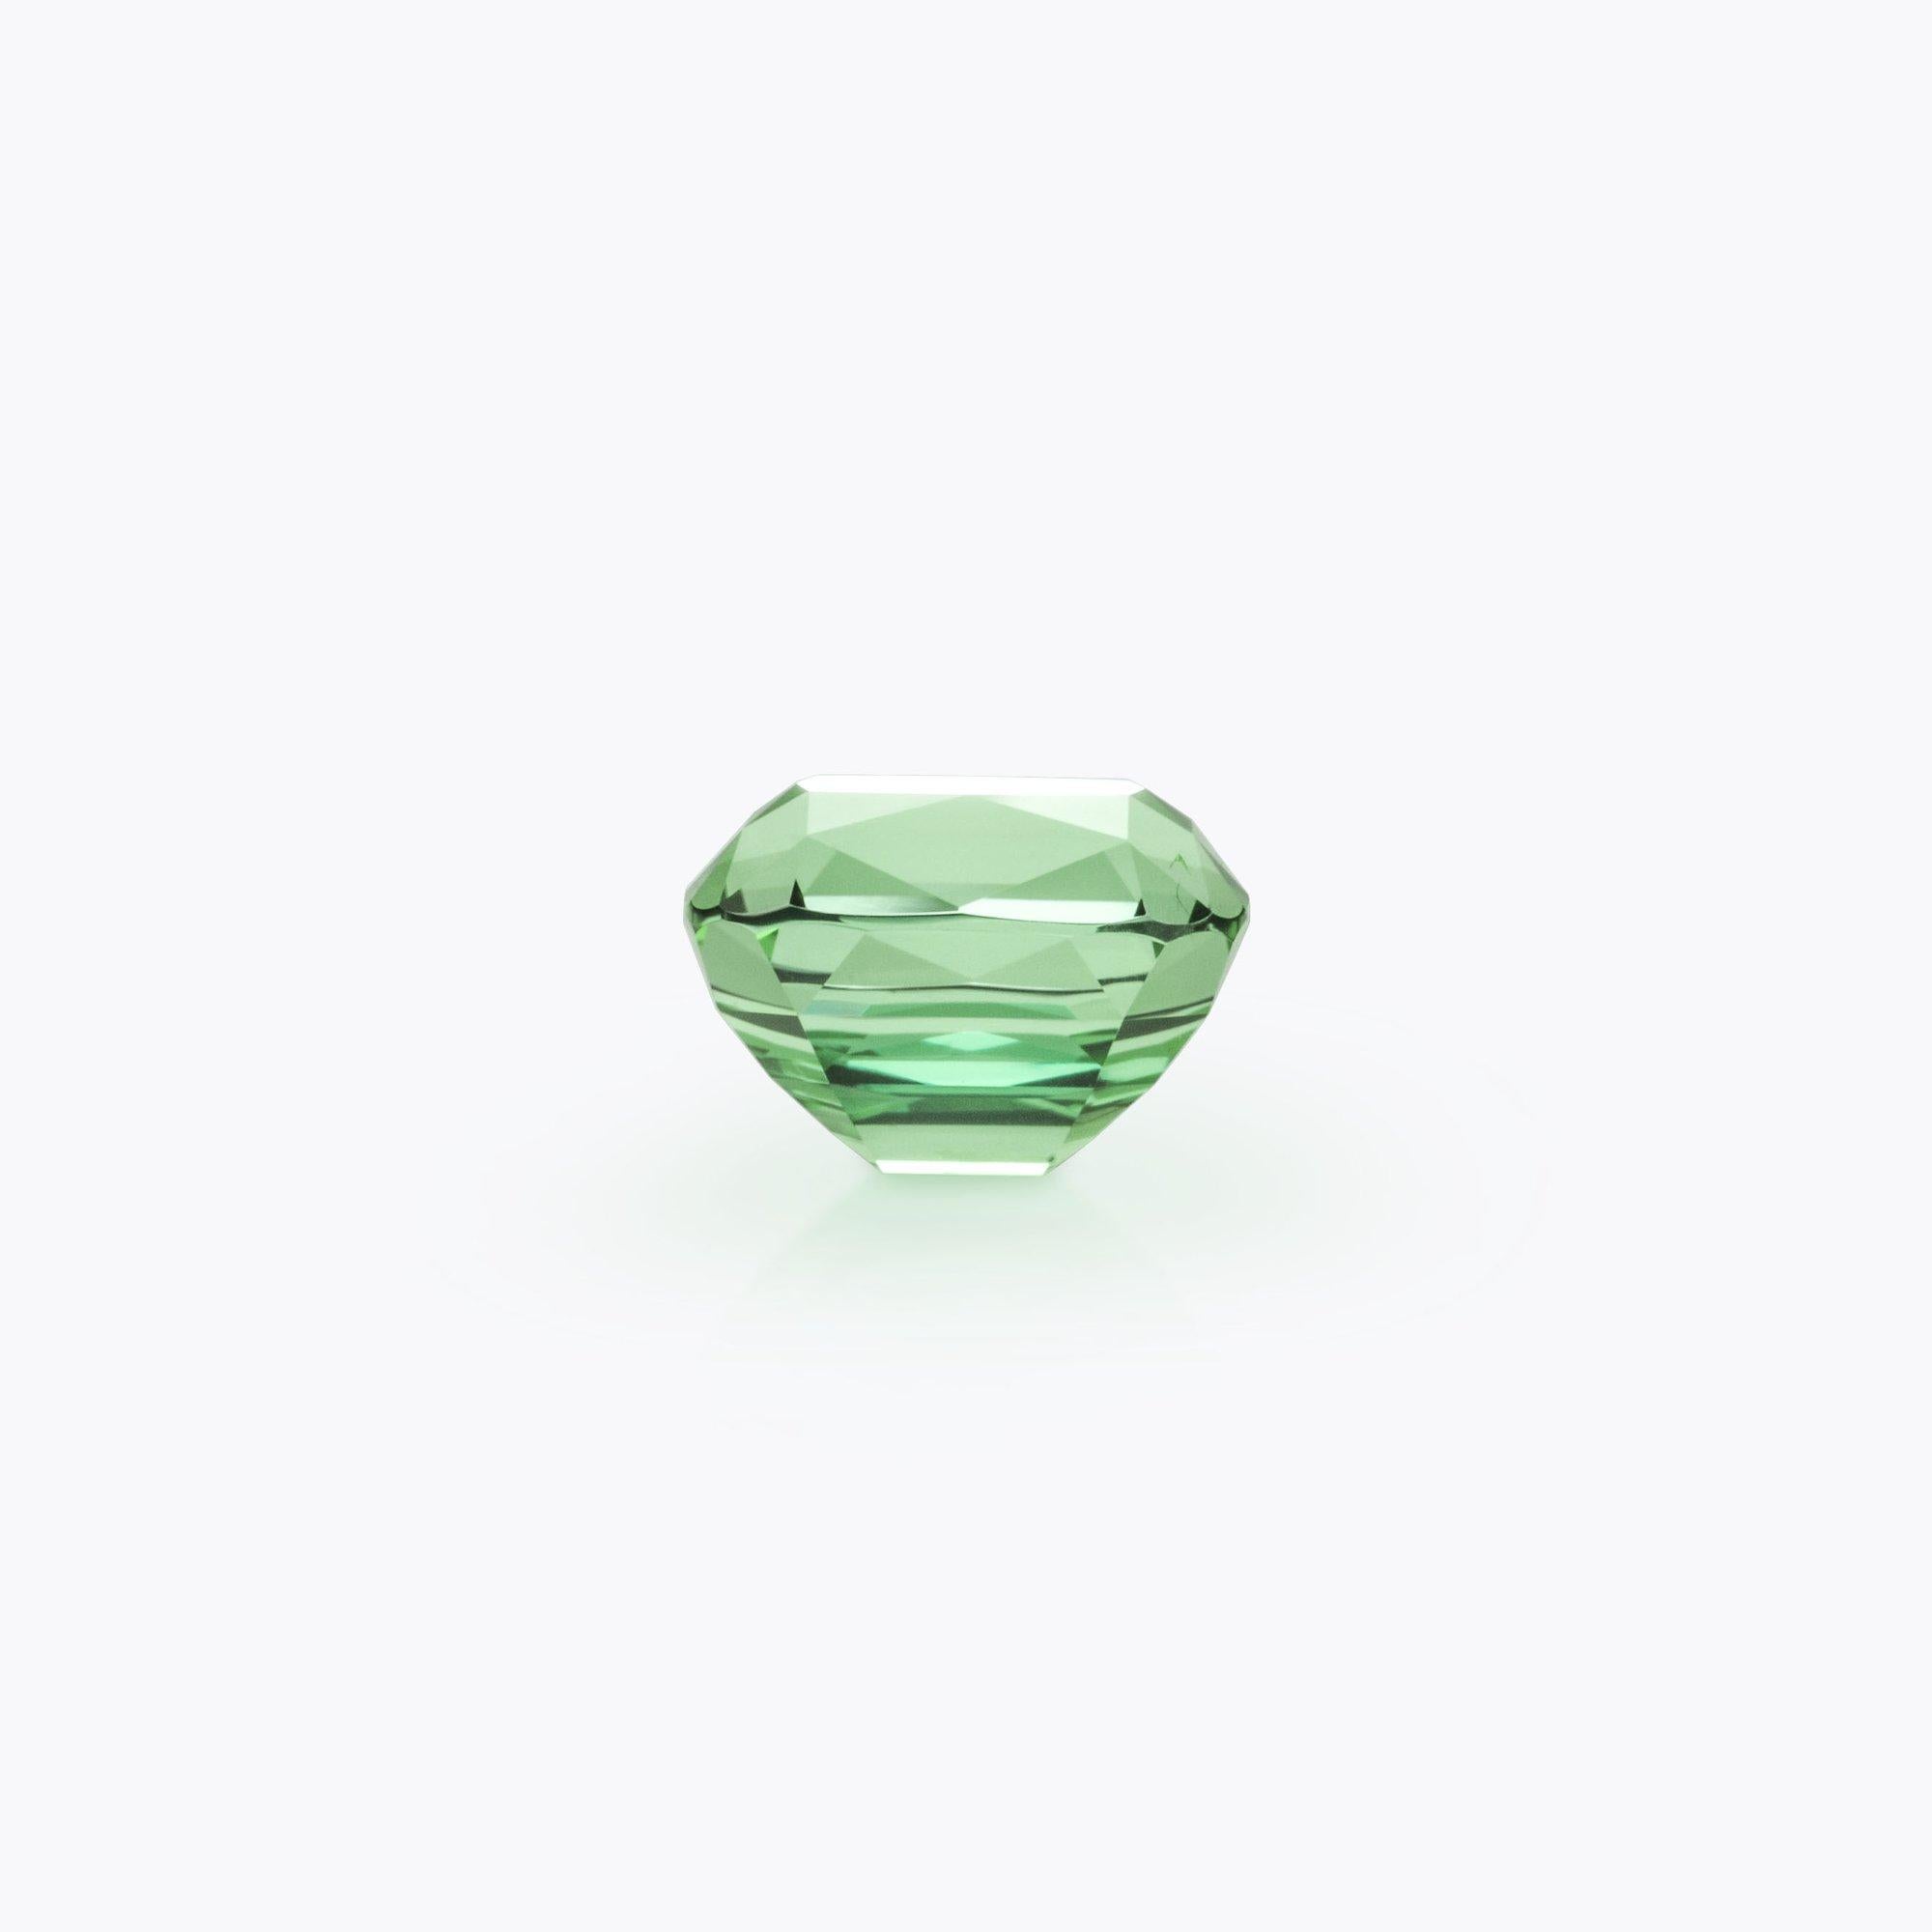 Remarkable 11.23 carat Mint Green Tourmaline cushion gem offered loose to a very precious lady or gentleman.
Dimensions: 13.70 x 11.10 x 9.50 mm.
Returns are accepted and paid by us within 7 days of delivery.
We offer supreme custom jewelry work